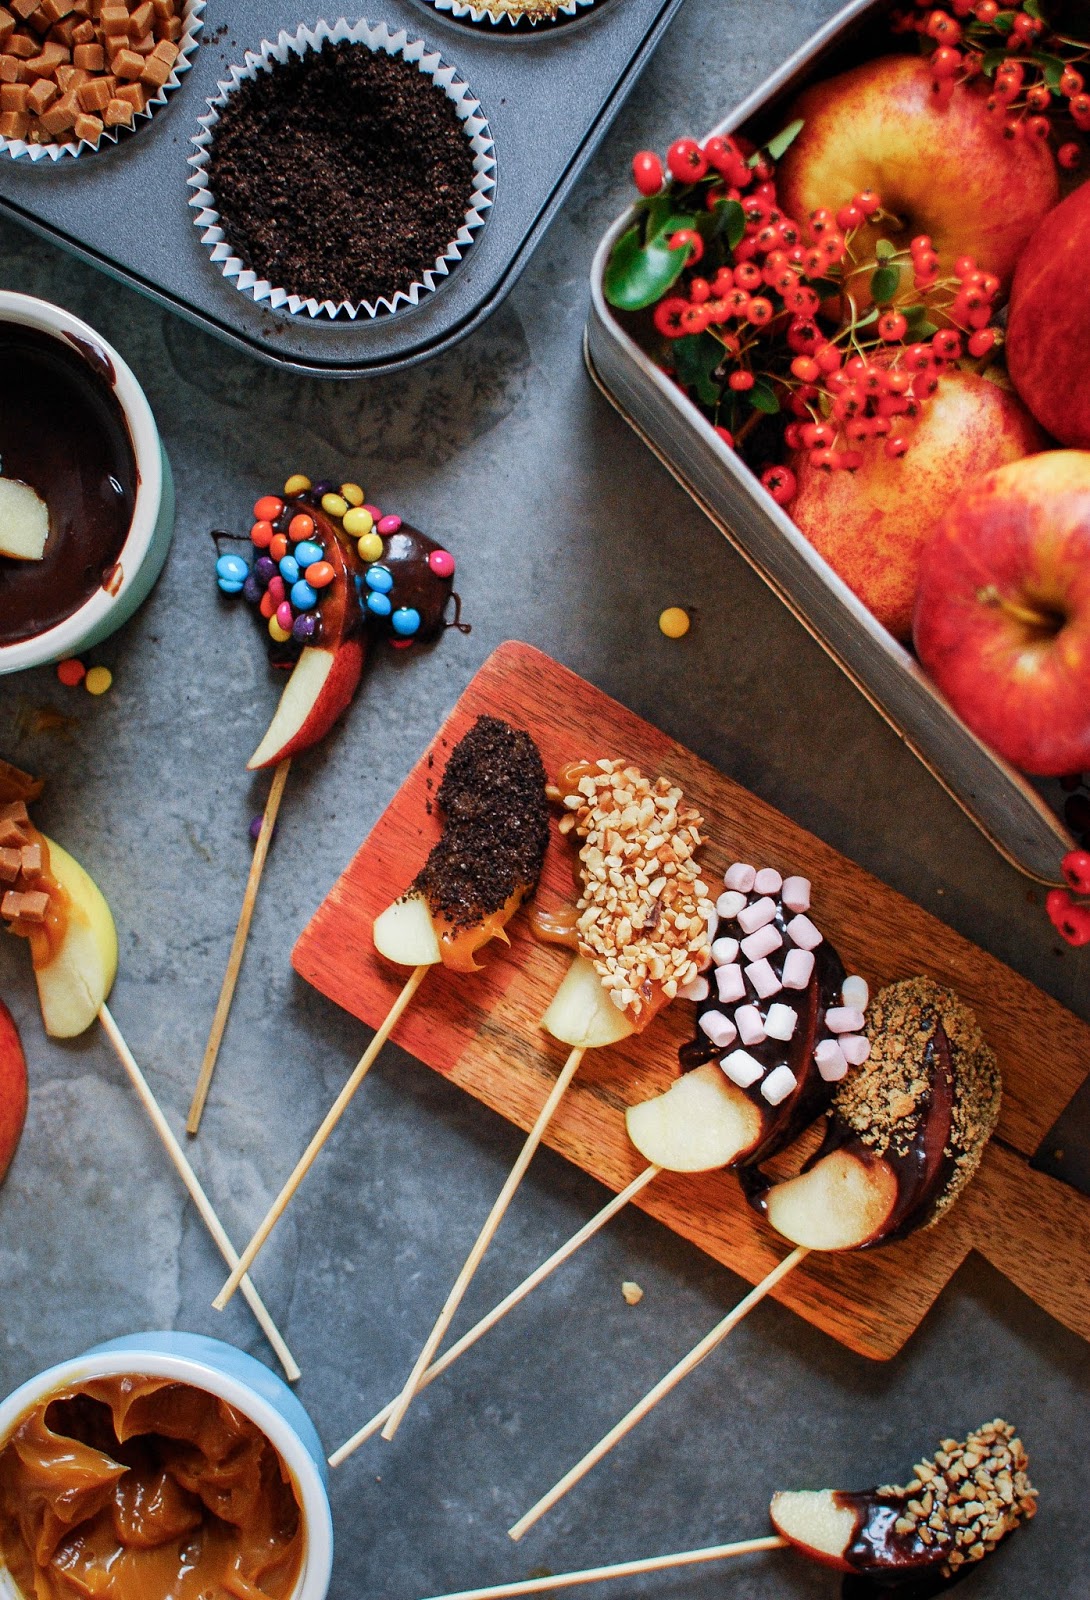 A super cute little candy apple bar. The perfect treat for indoor and outdoor picnics, weather permitting of course.